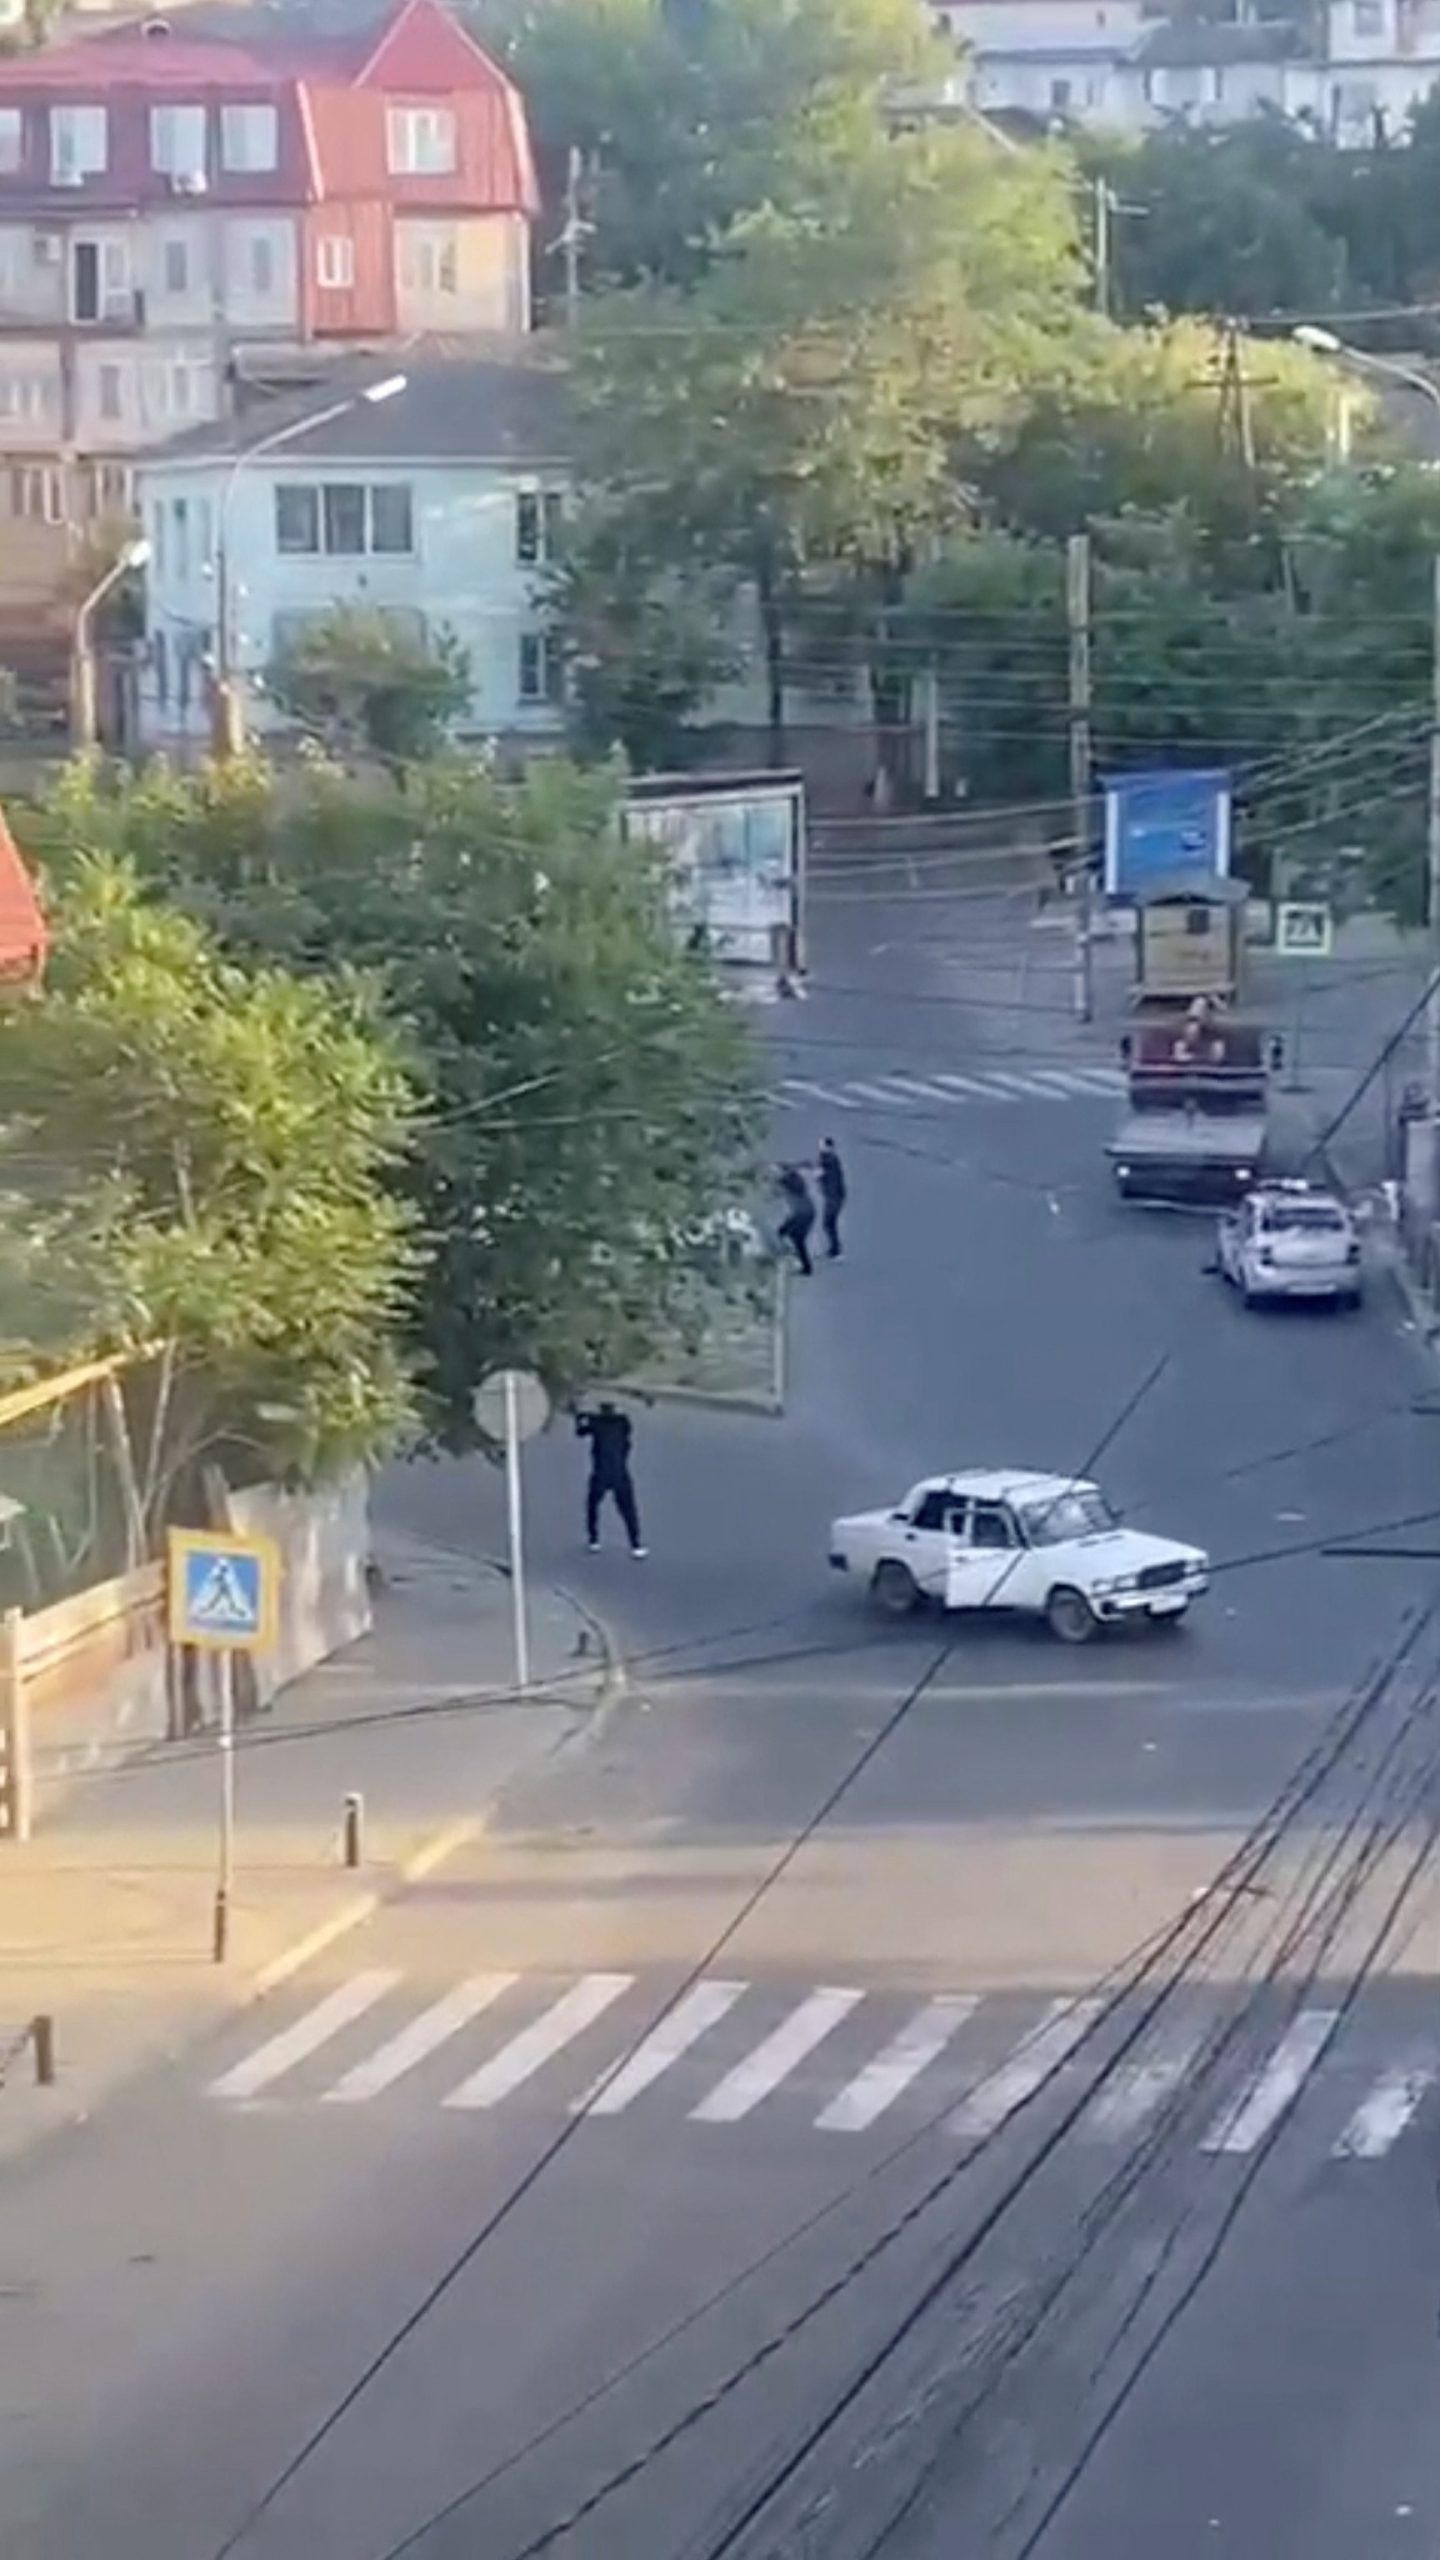 Officials confirm 9 fatalities, including police officers, in attacks on synagogue and Orthodox church in southern Russia